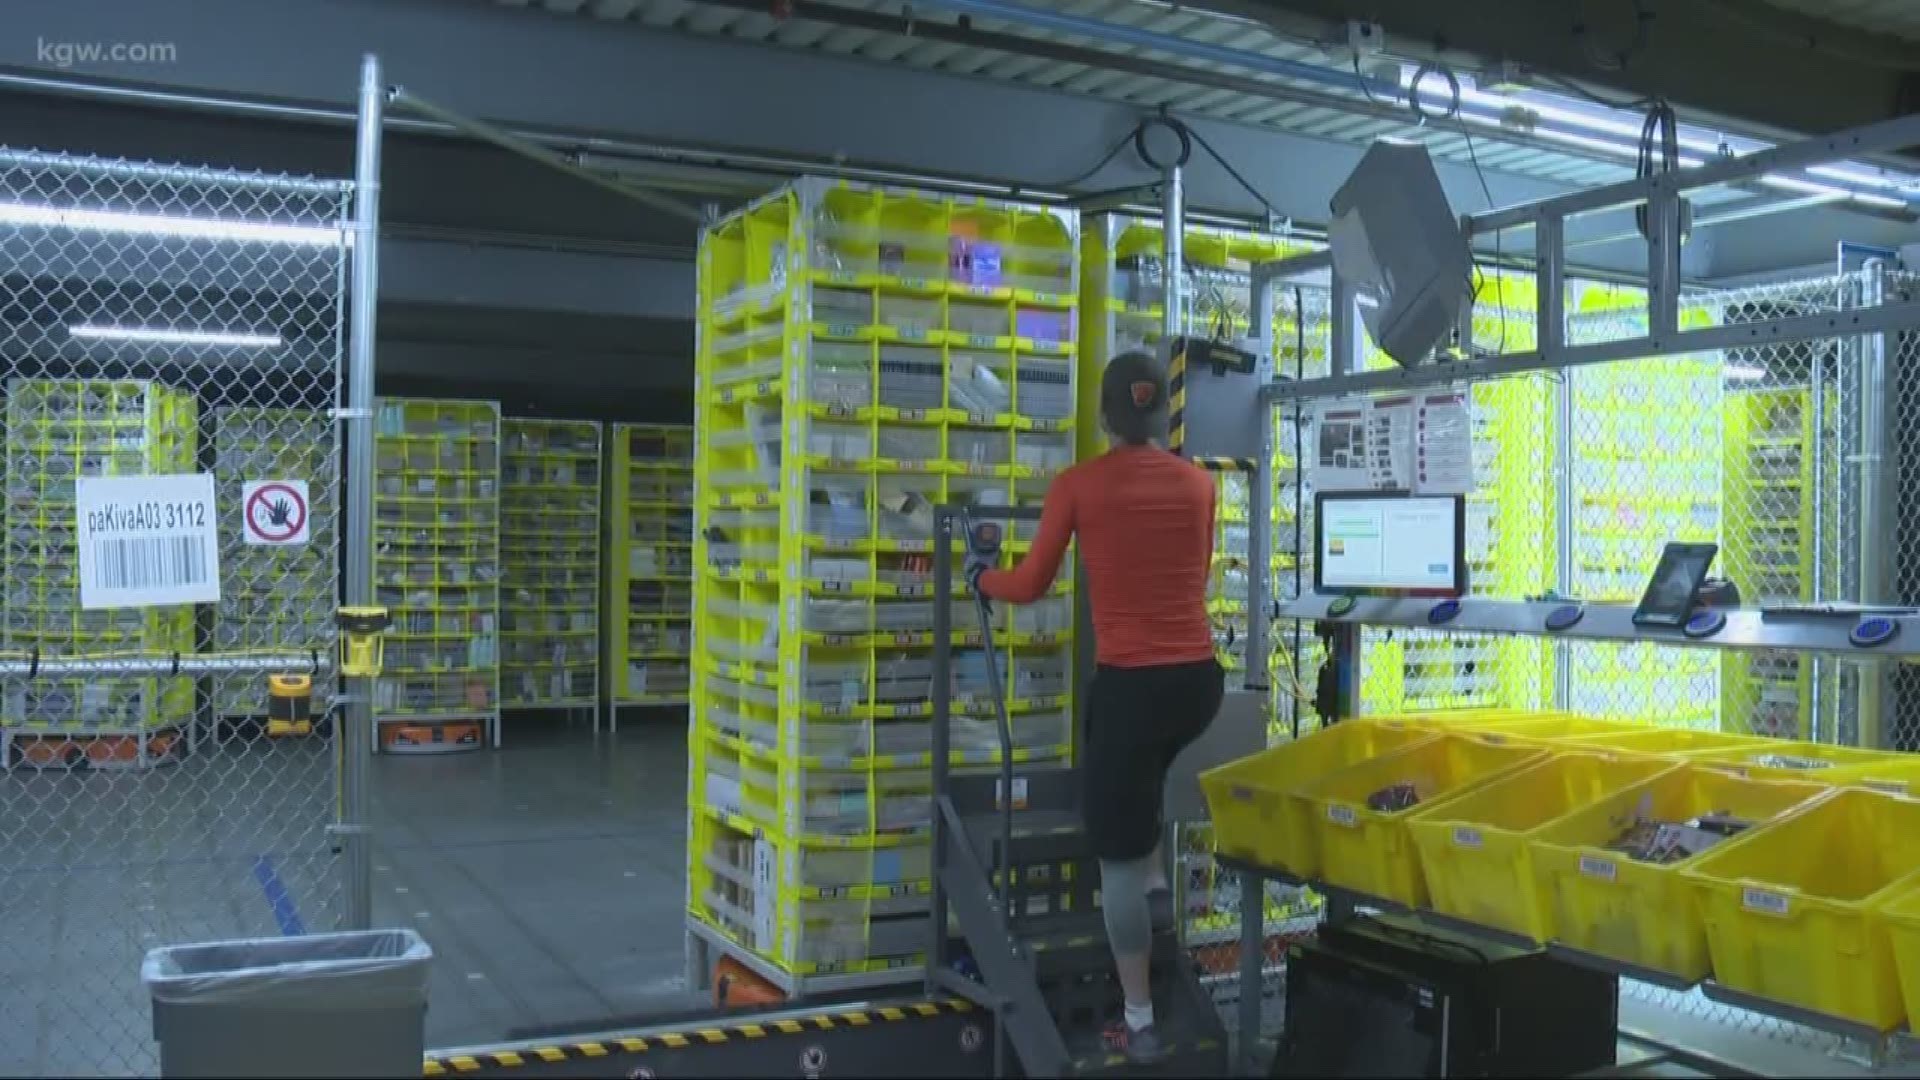 Here's a look at the working conditions inside a new Amazon fulfillment center in Troutdale, Oregon.